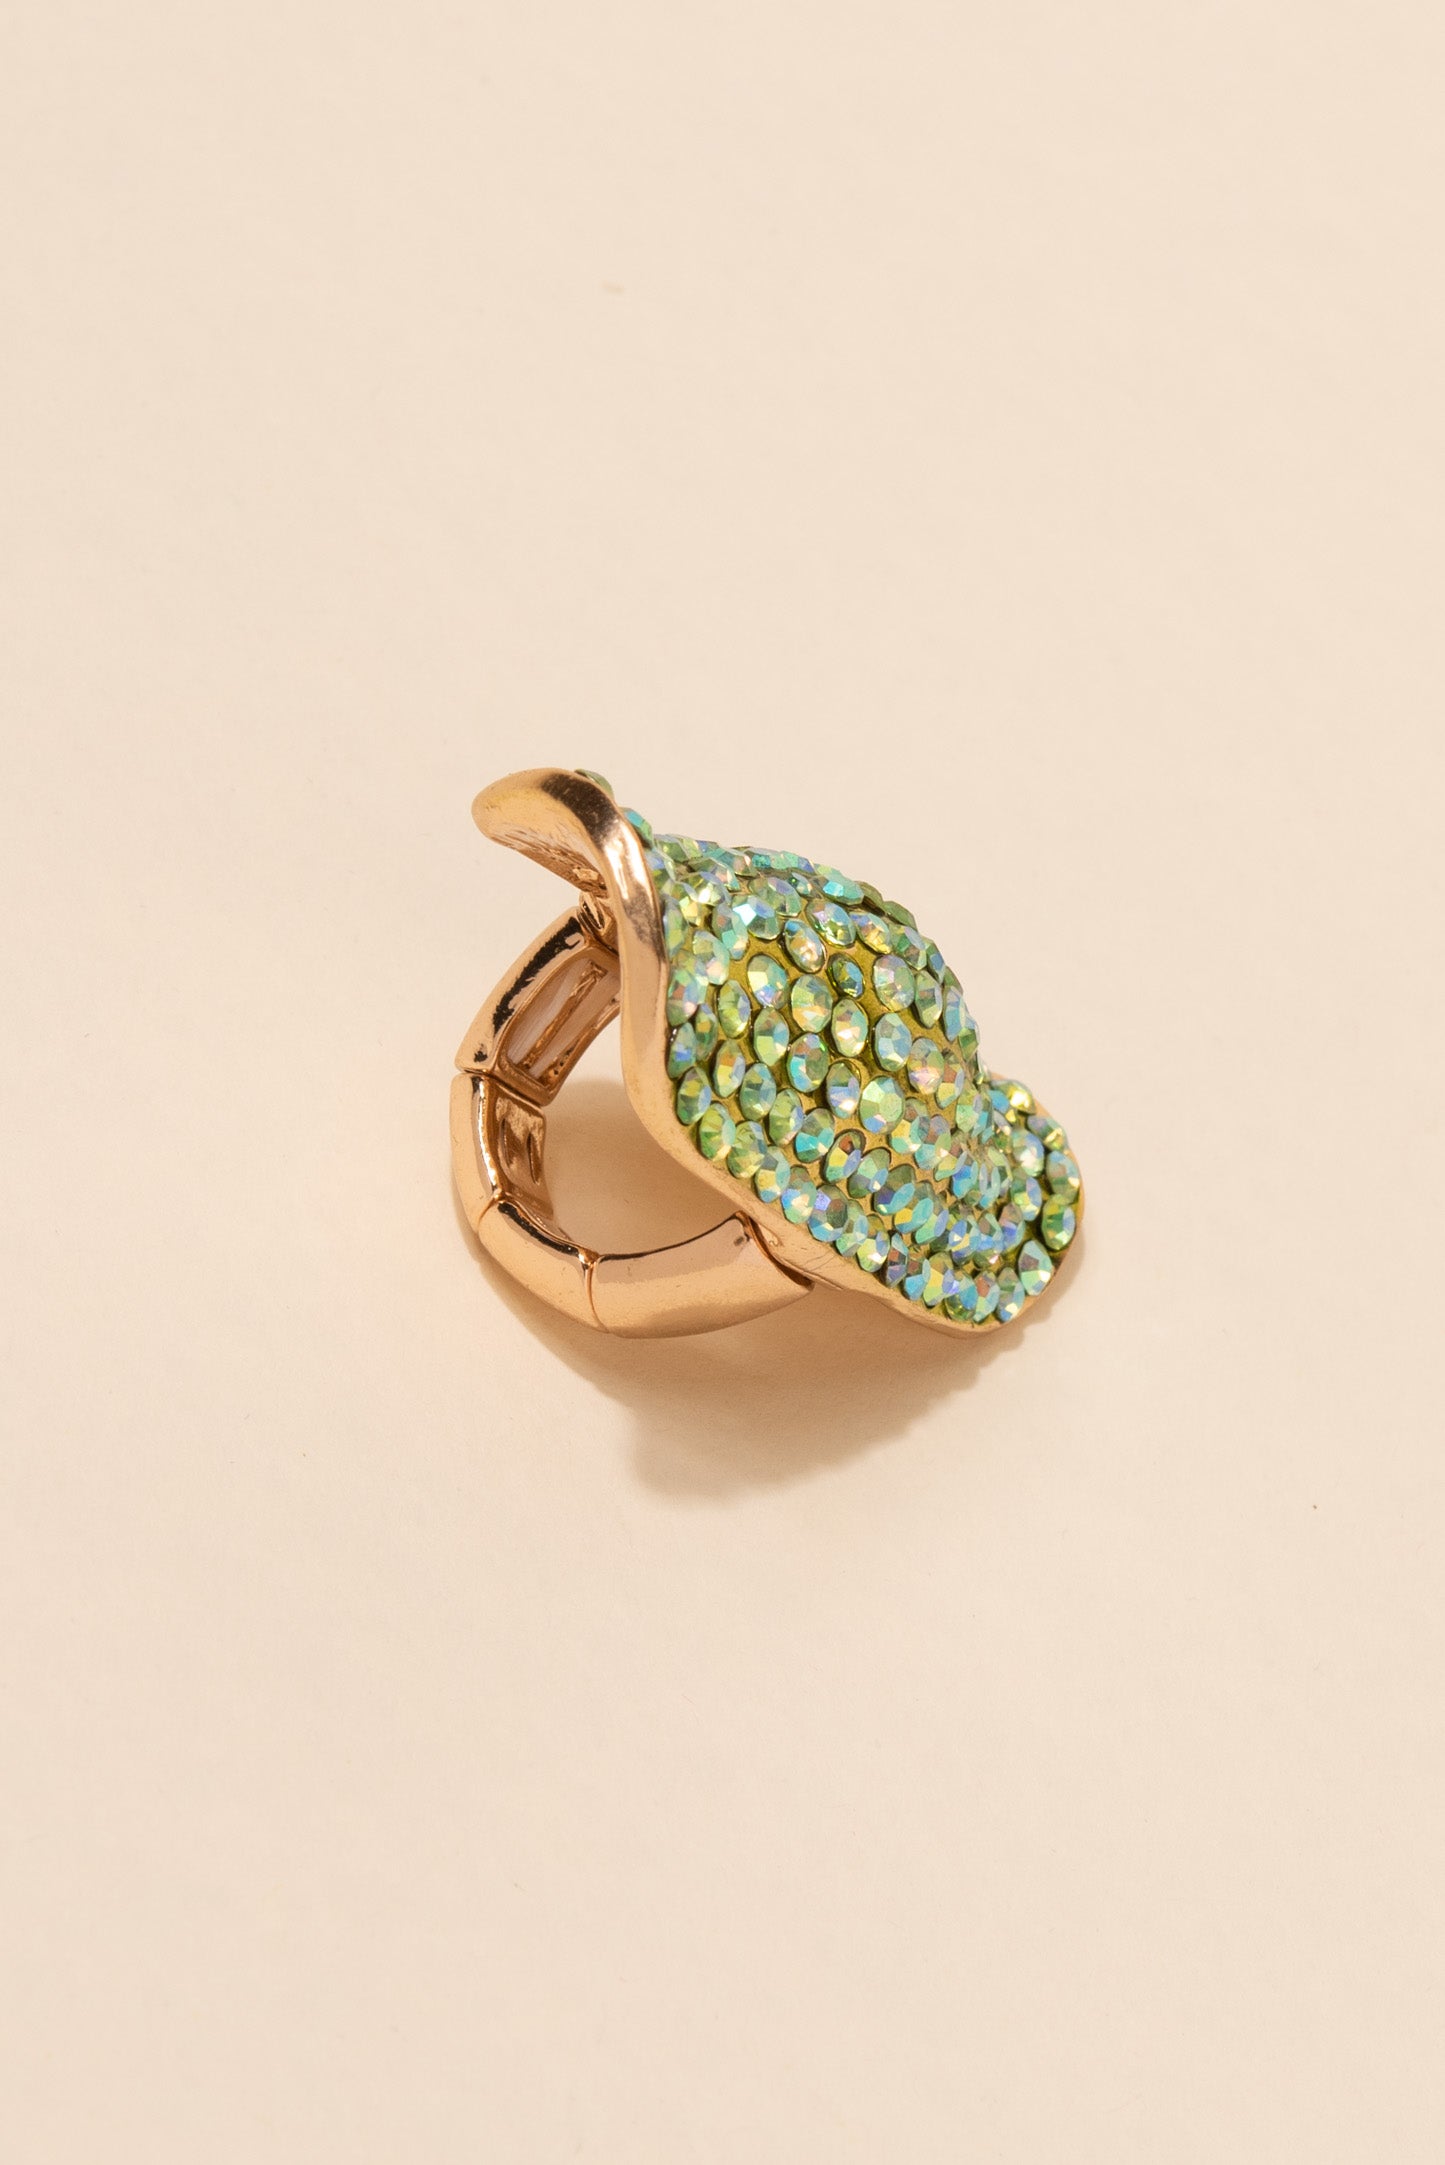 Alexis Long Shield Statement Ring - Green Rainbow